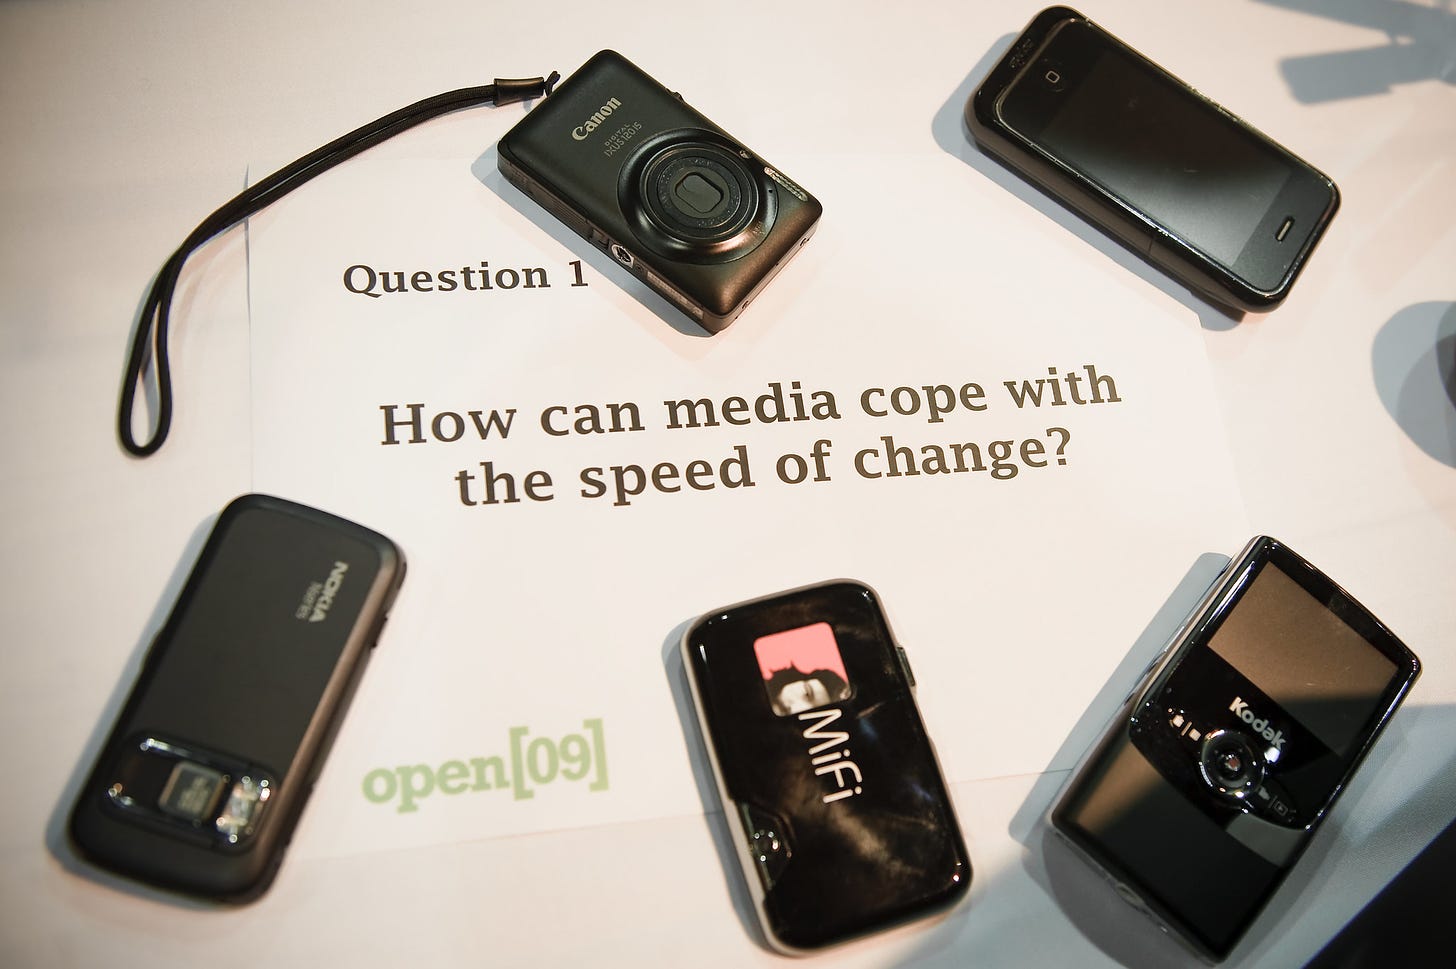 a table at a conference has a number of devices strewn across it. A flip camera, a mobile wireless hotspot, a compact camera and a Nokia and an early iPhone. On the table is written 'How can media cope with the speed of change.